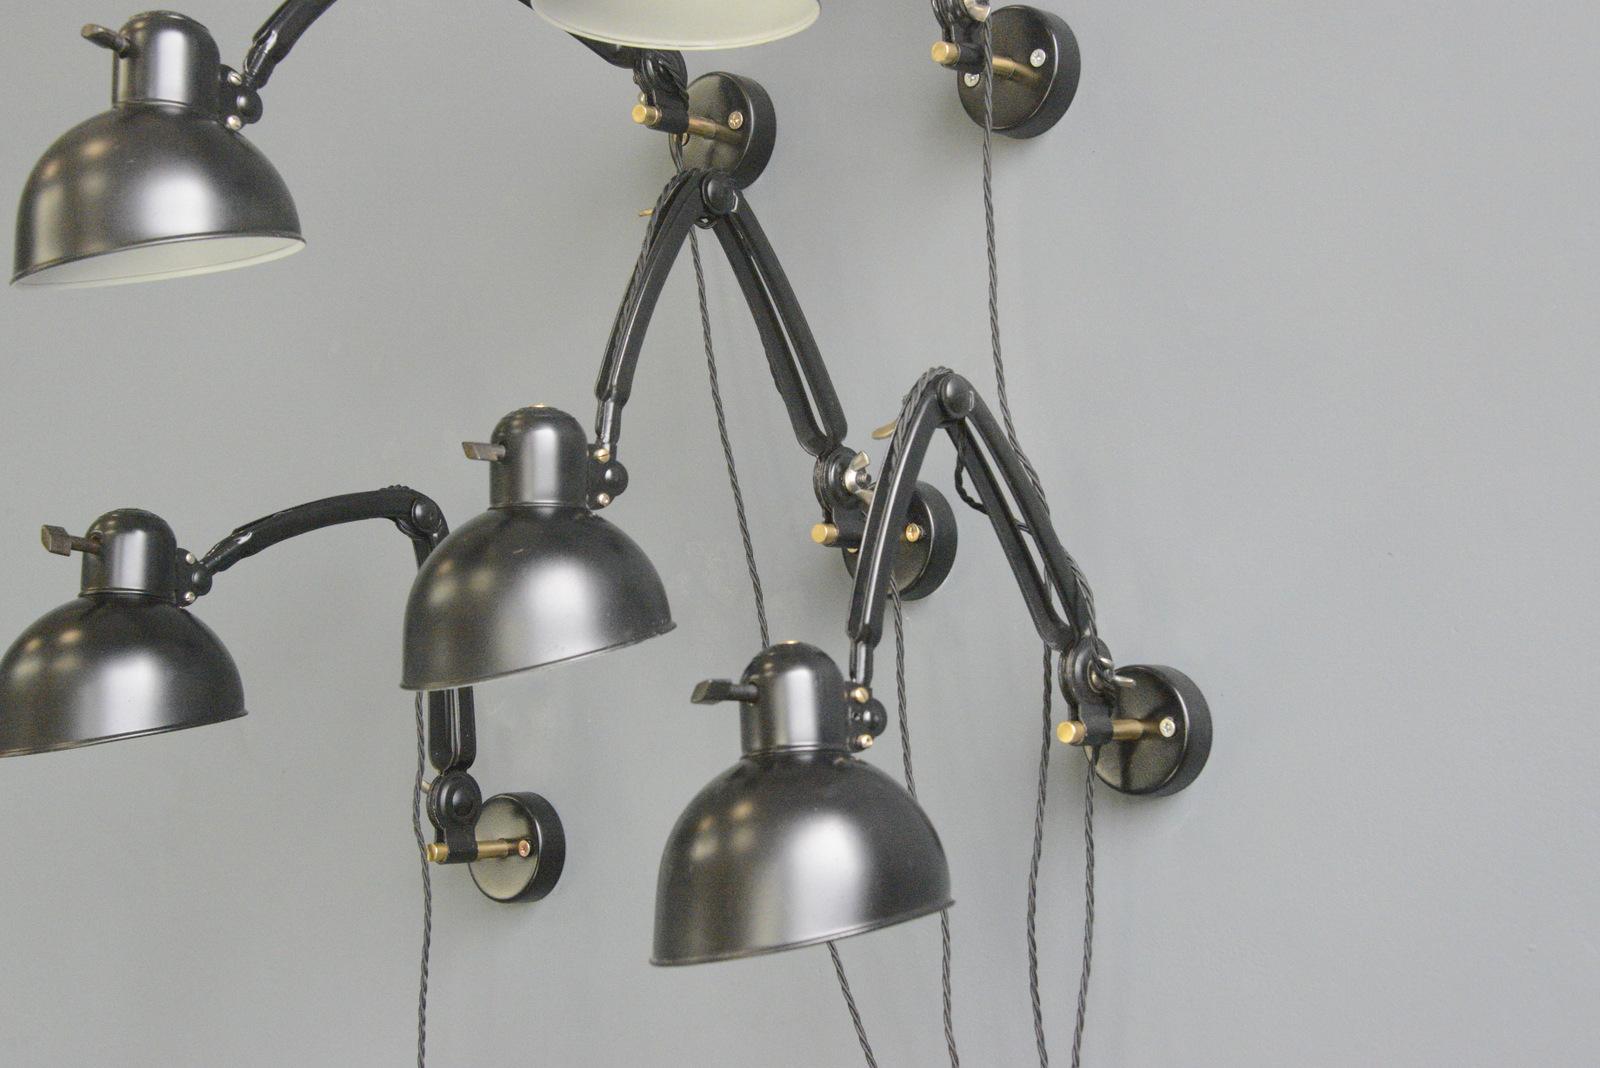 - Articulated arms and shade
- Takes E27 fitting bulbs
- Original bakelite On/Off toggle switch
- Designed by Christian Dell
- Produced by Kaiser Idell
- German ~ 1930s
- 16cm wide 12cm tall 
- Extends up to 60cm from the wall

Christian